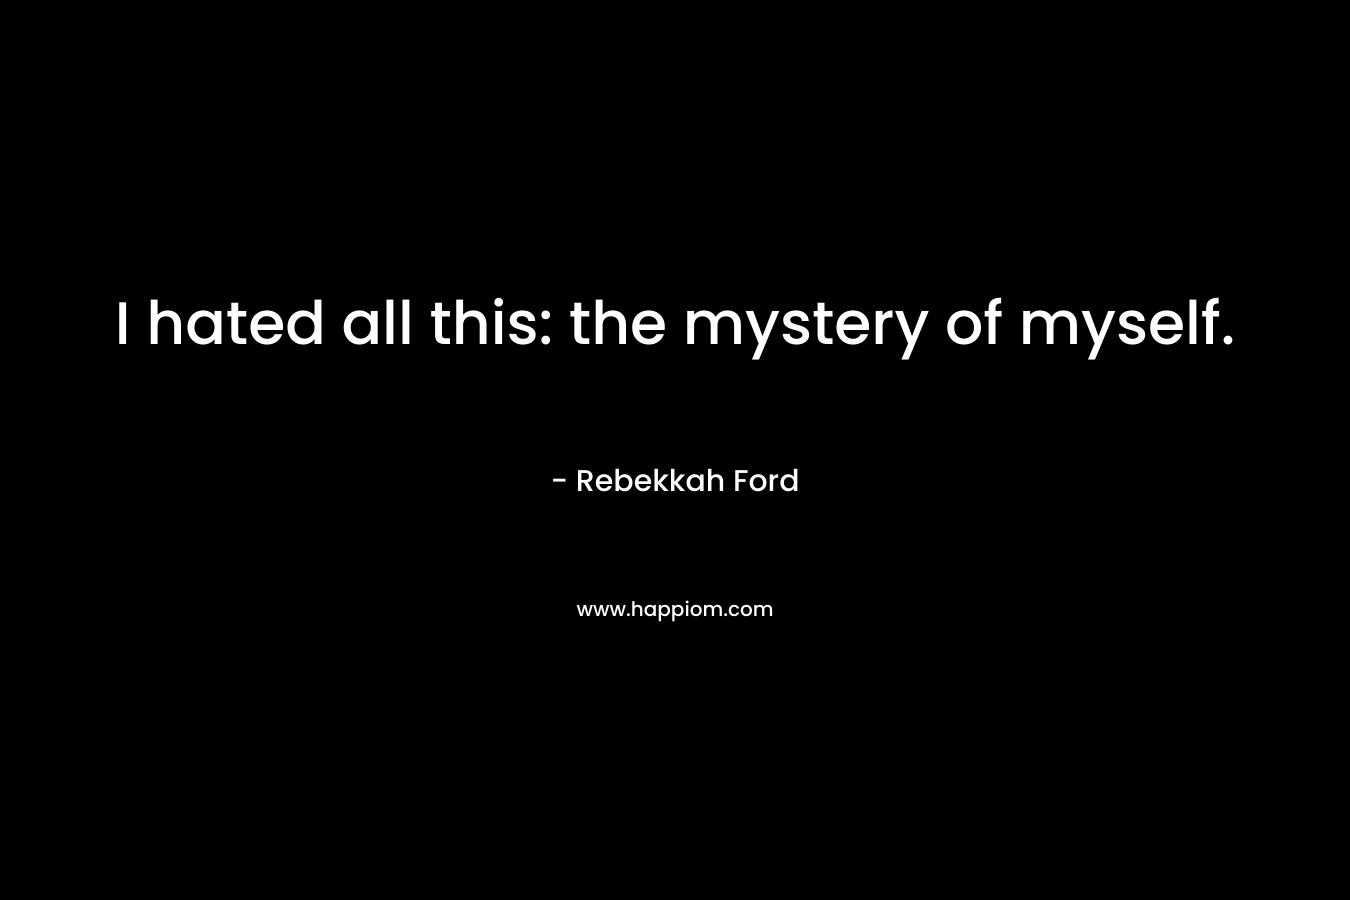 I hated all this: the mystery of myself. – Rebekkah Ford